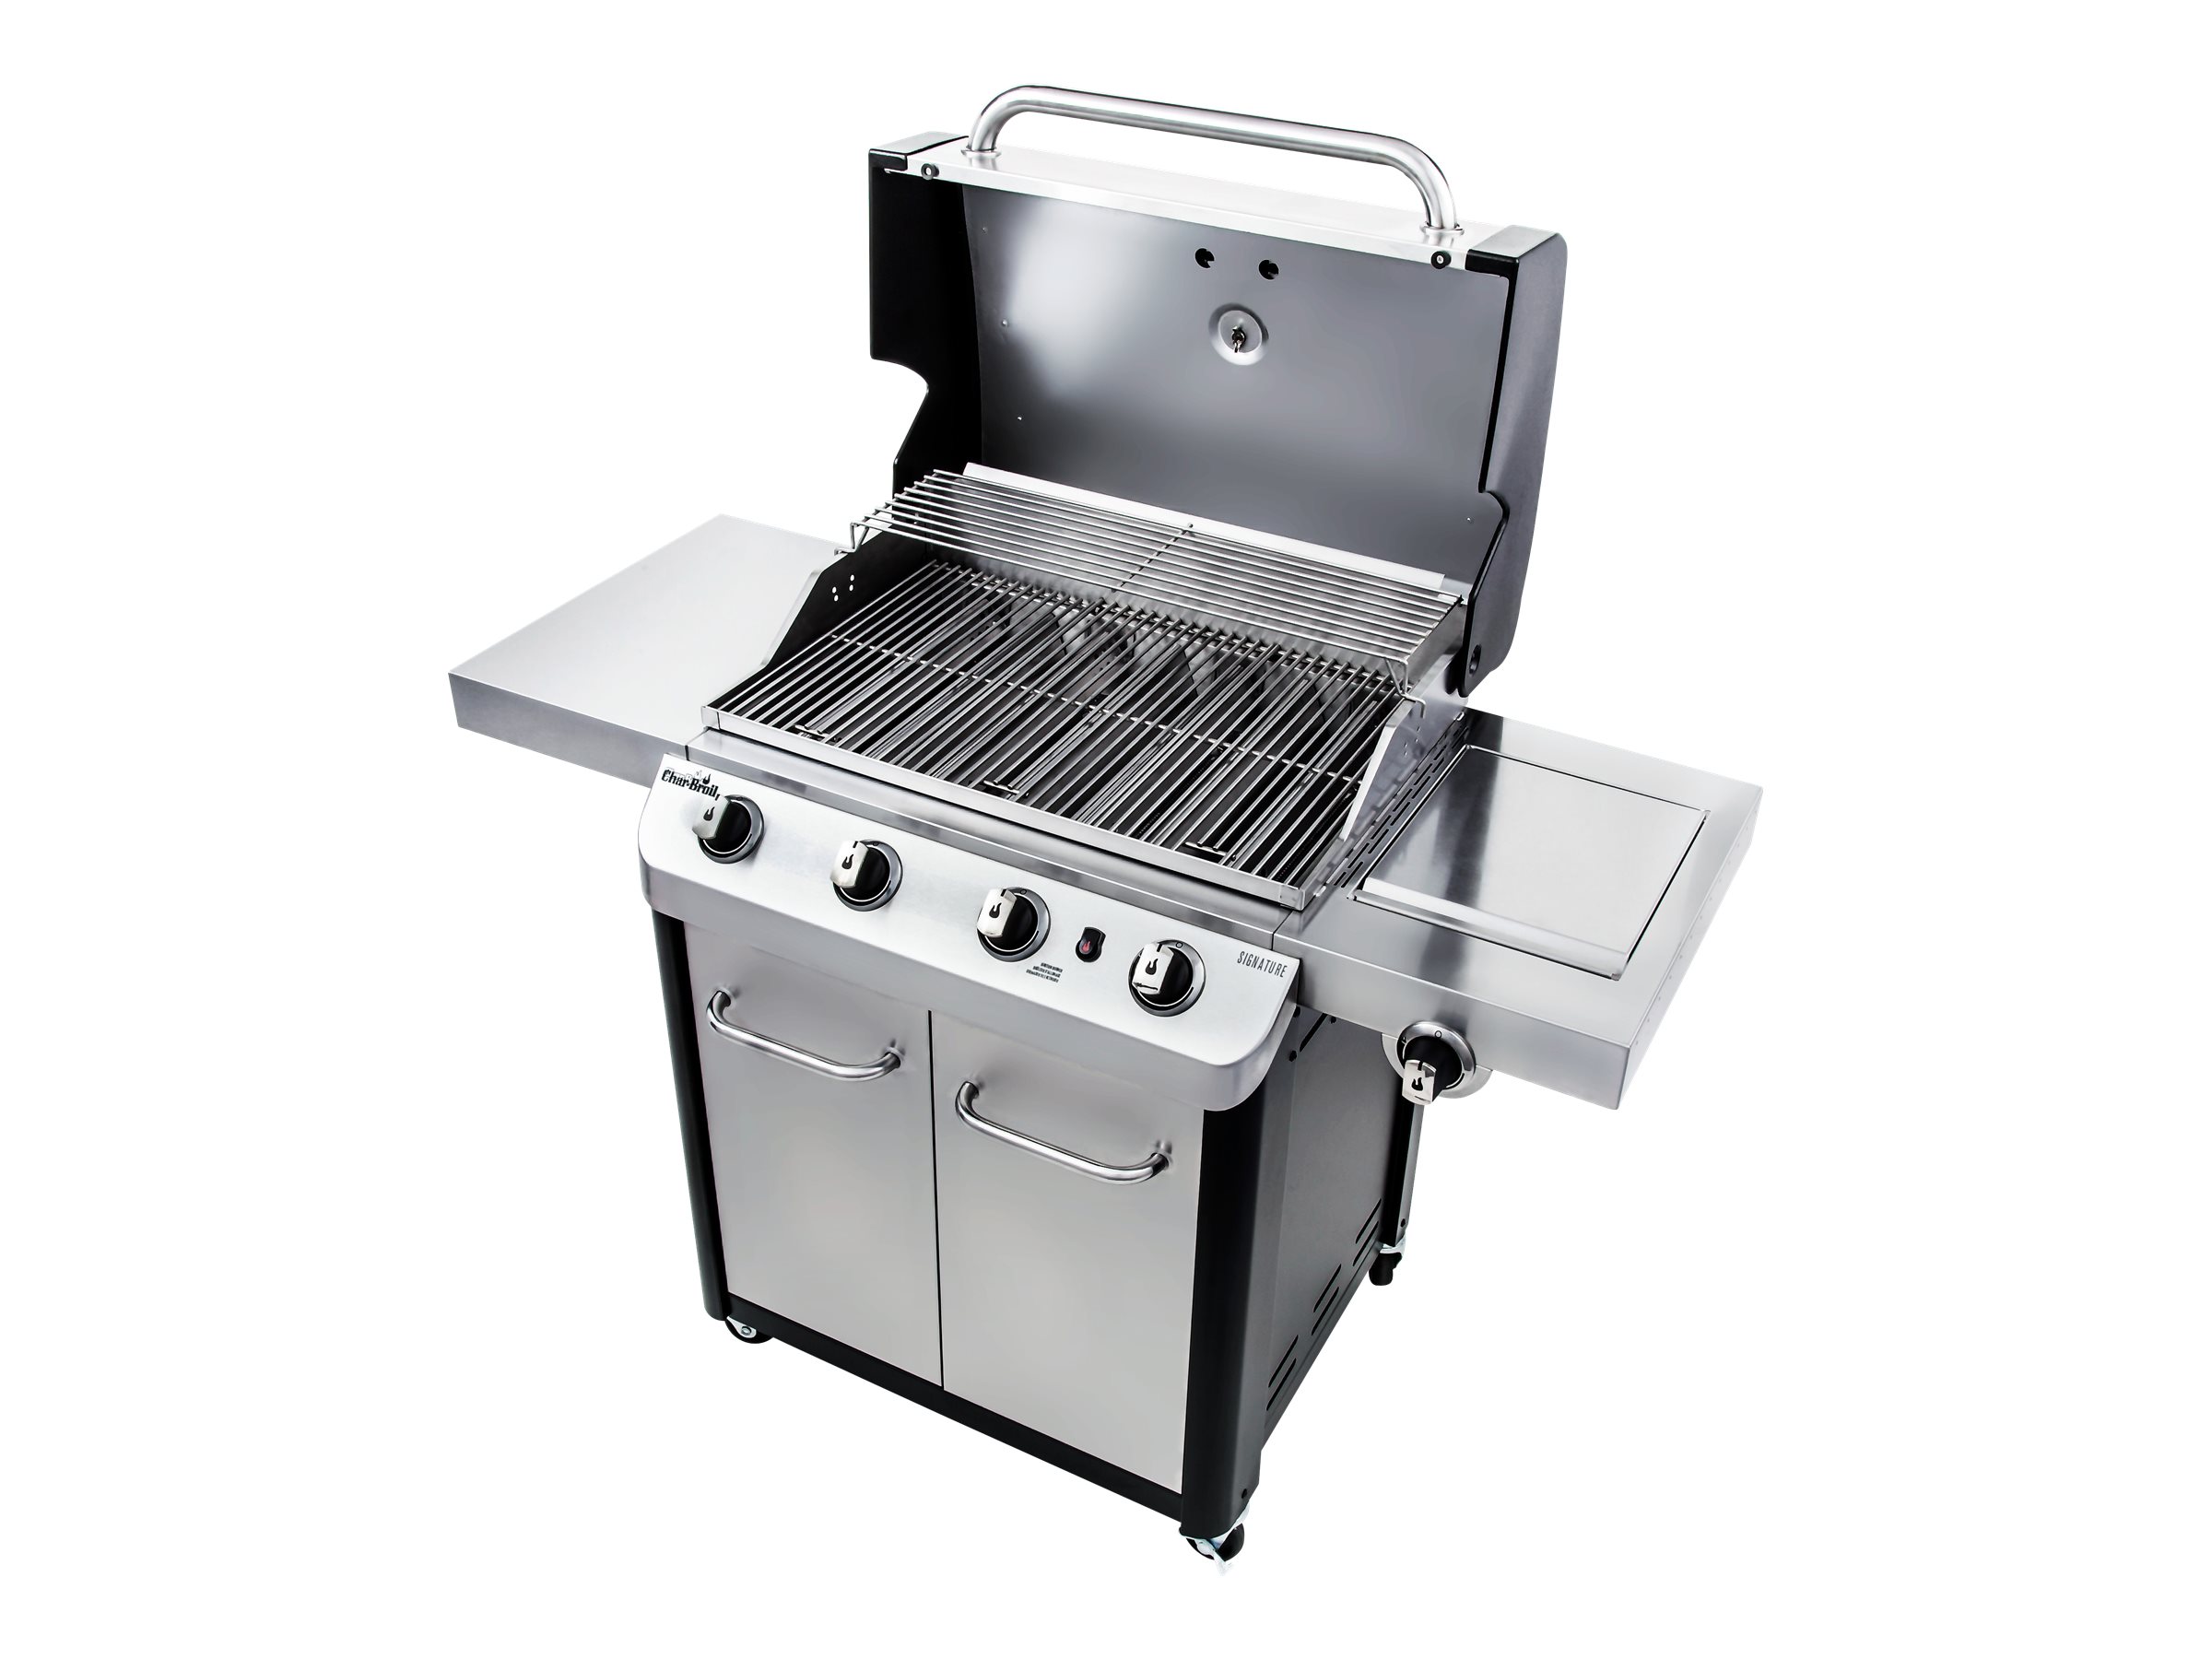 Char-Broil Signature 4-Burner Gas Grill - image 4 of 11